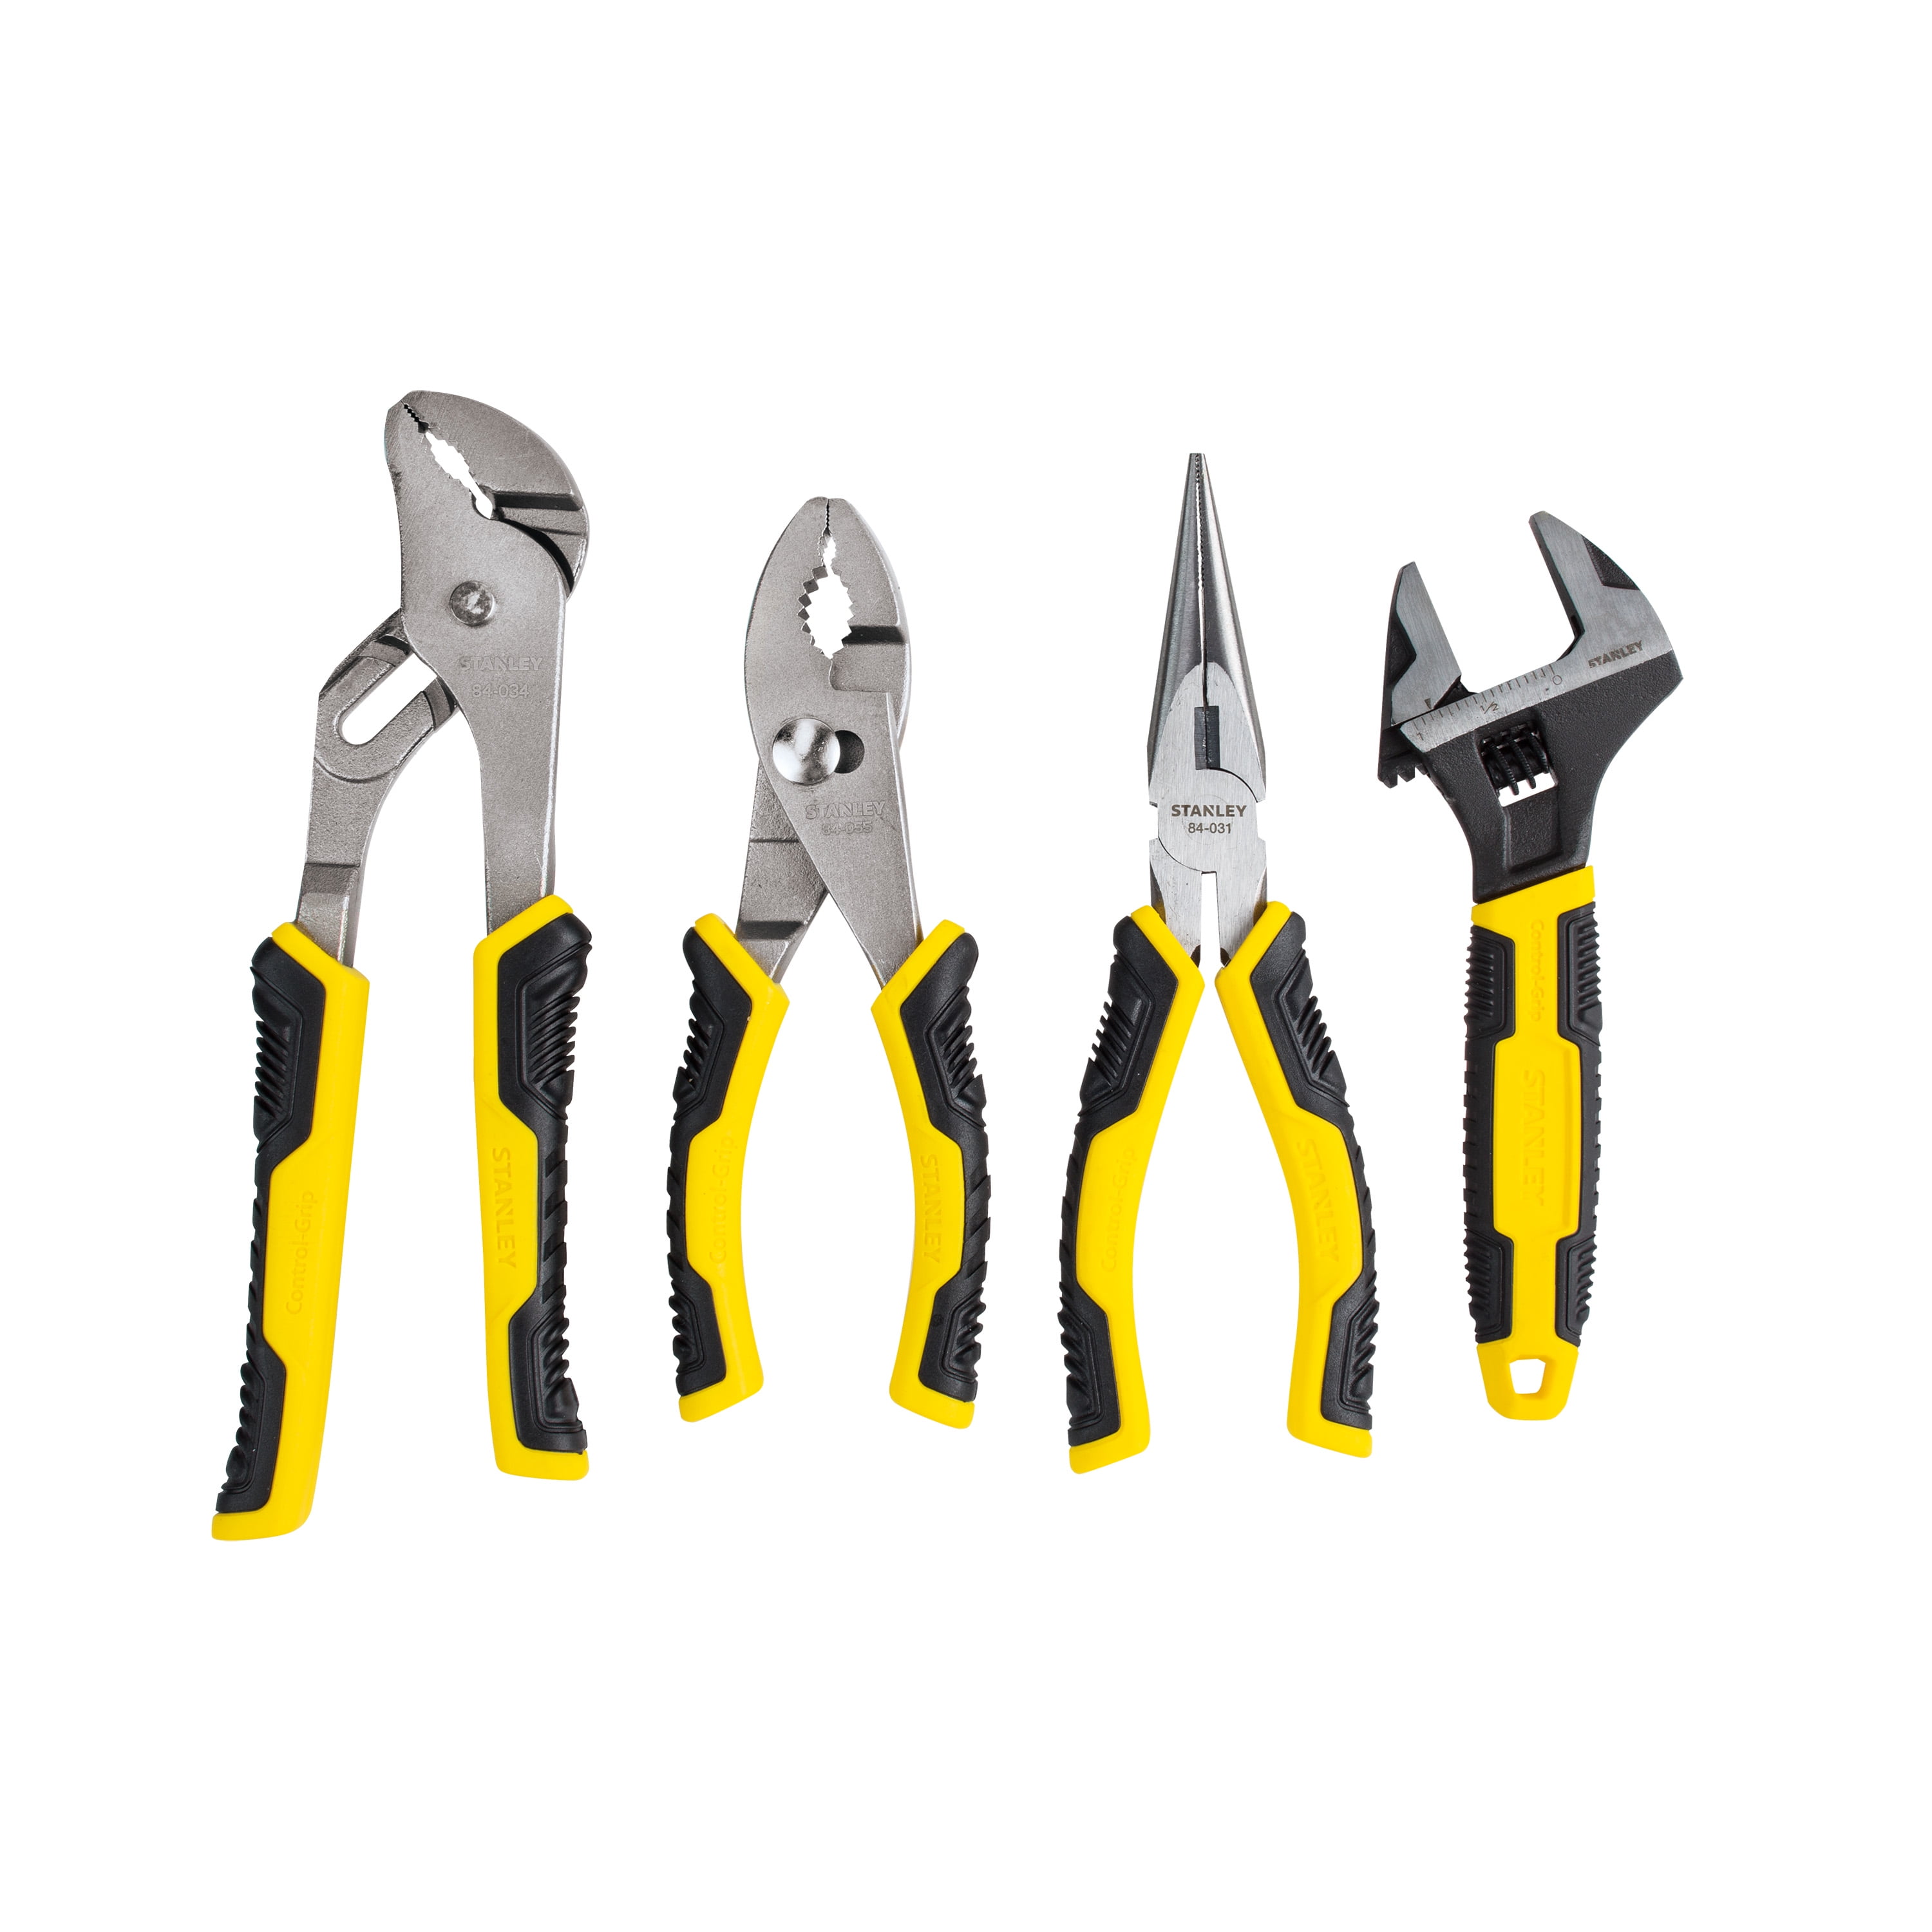 Wrench STANLEY Sets 84-558 4-Piece and Adjustable Set Tool Plier